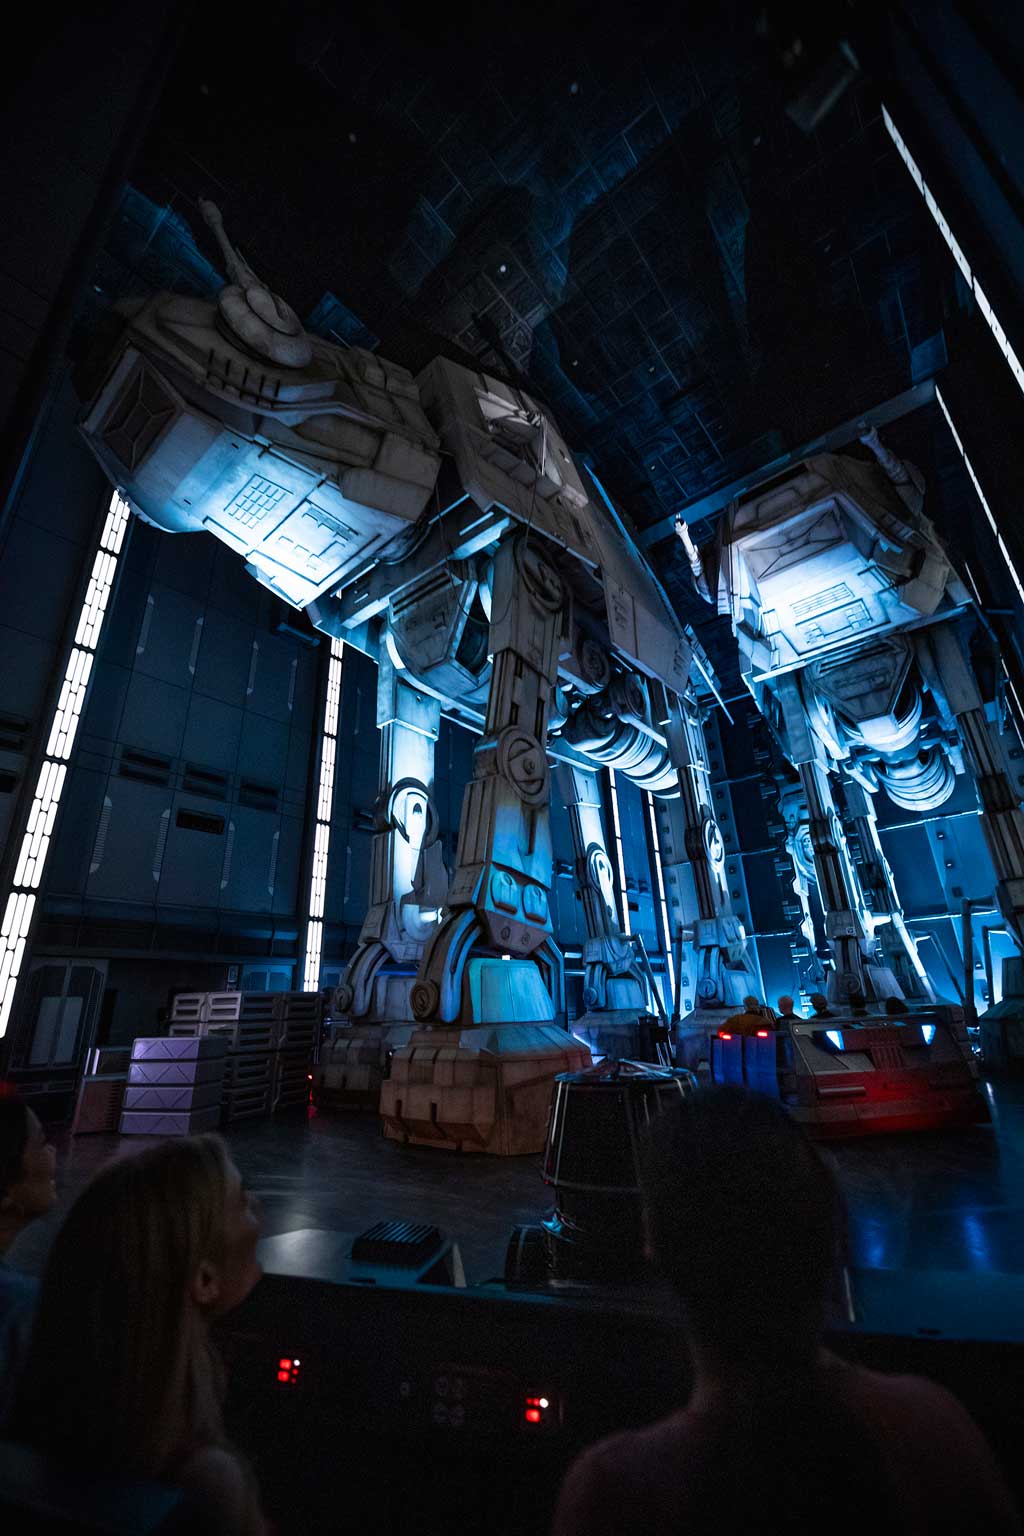 Guests race past massive AT-AT walkers aboard a First Order Star Destroyer as part of Star Wars: Rise of the Resistance, the groundbreaking new attraction opening Dec. 5, 2019, inside Star Wars: Galaxy’s Edge at Disney’s Hollywood Studios in Florida and Jan. 17, 2020, at Disneyland Park in California. (Matt Stroshane, photographer)